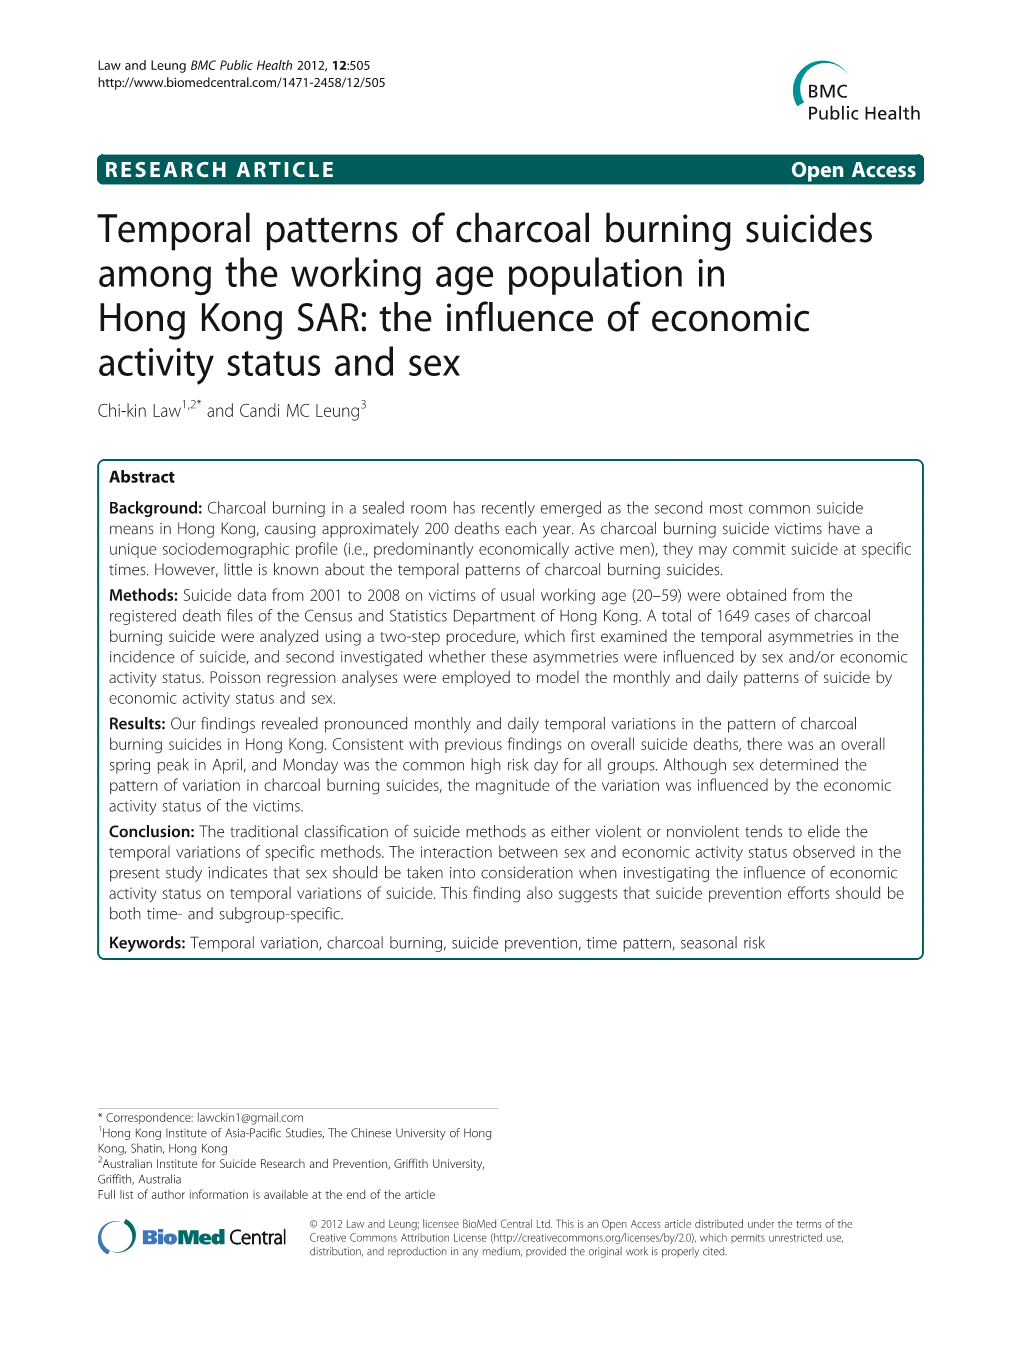 Temporal Patterns of Charcoal Burning Suicides Among